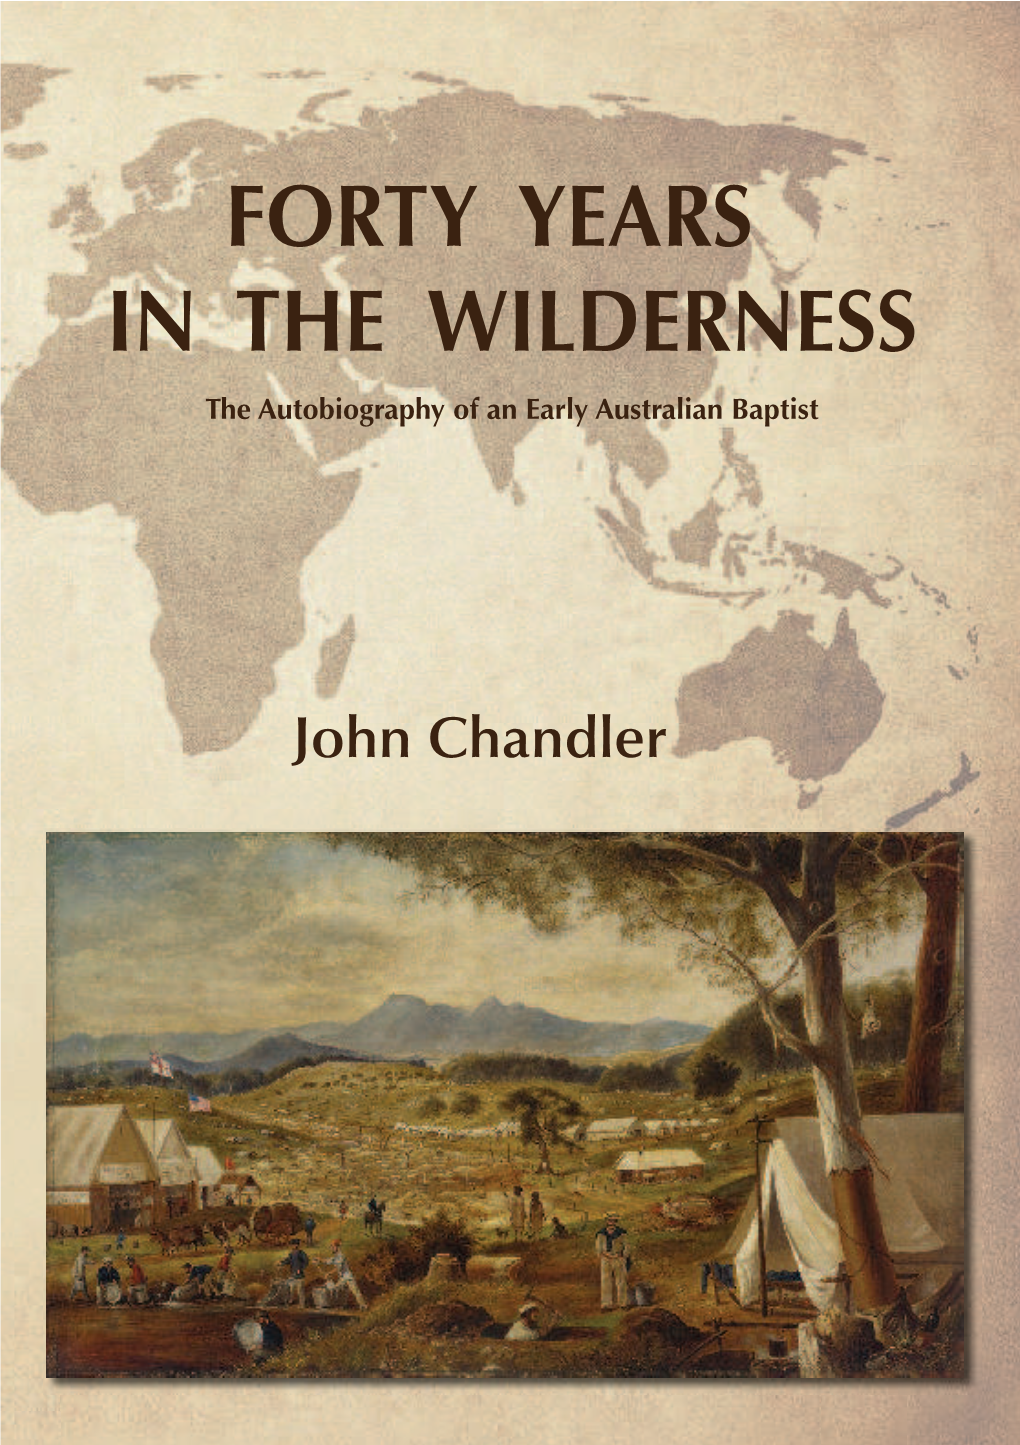 FORTY YEARS in the WILDERNESS the Autobiography of an Early Australian Baptist